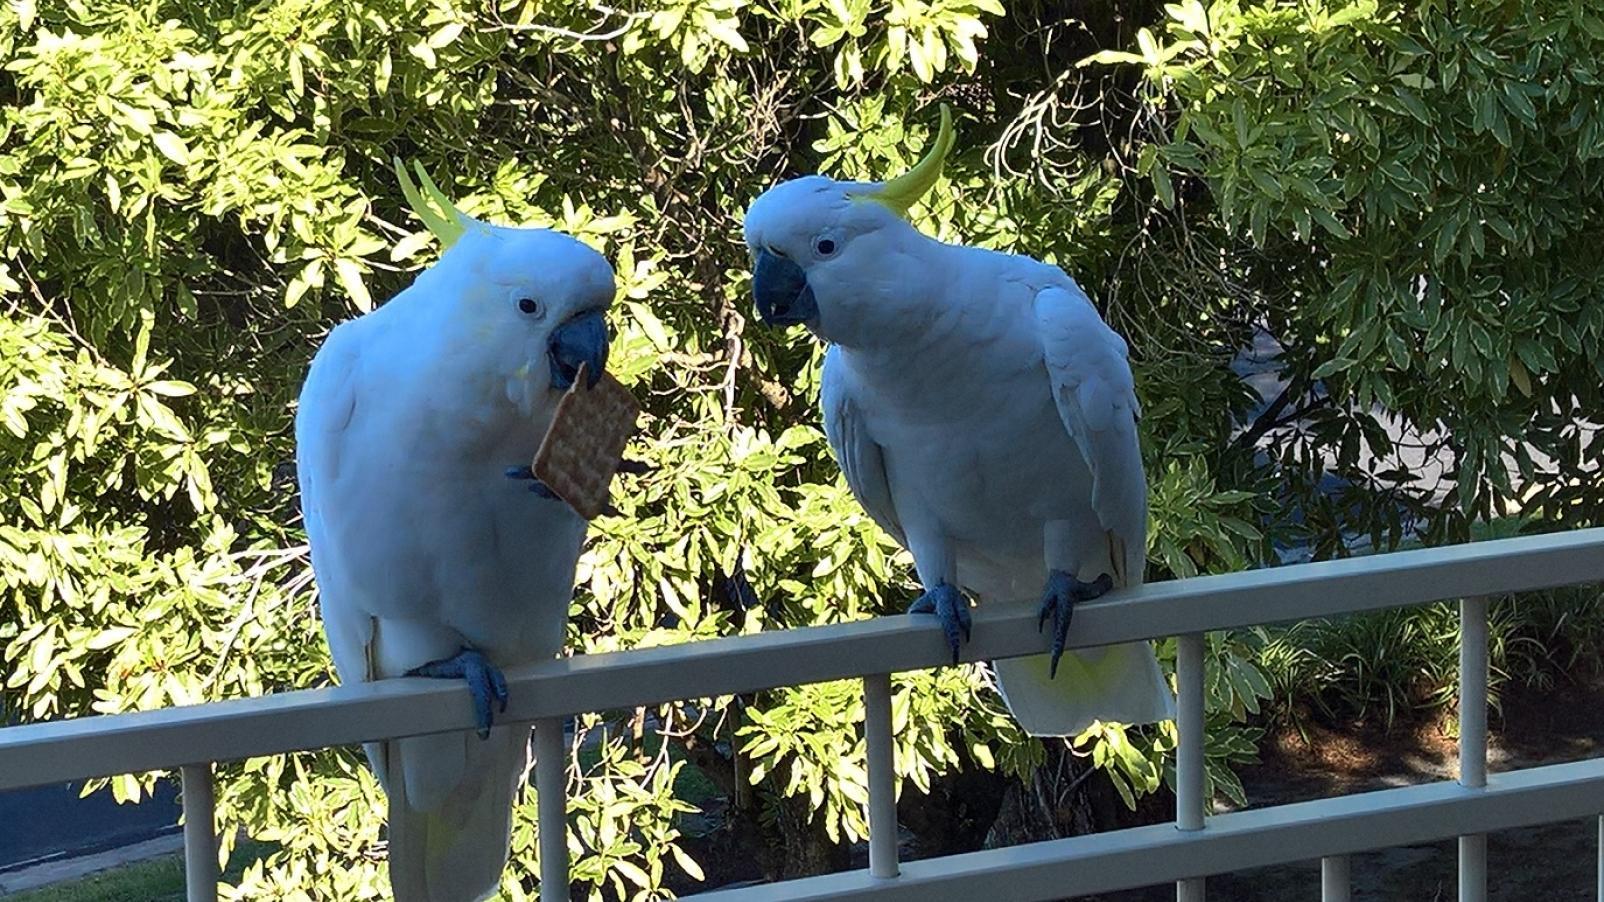 Two cockatoos perched on a balcony railing eating a dry biscuit.